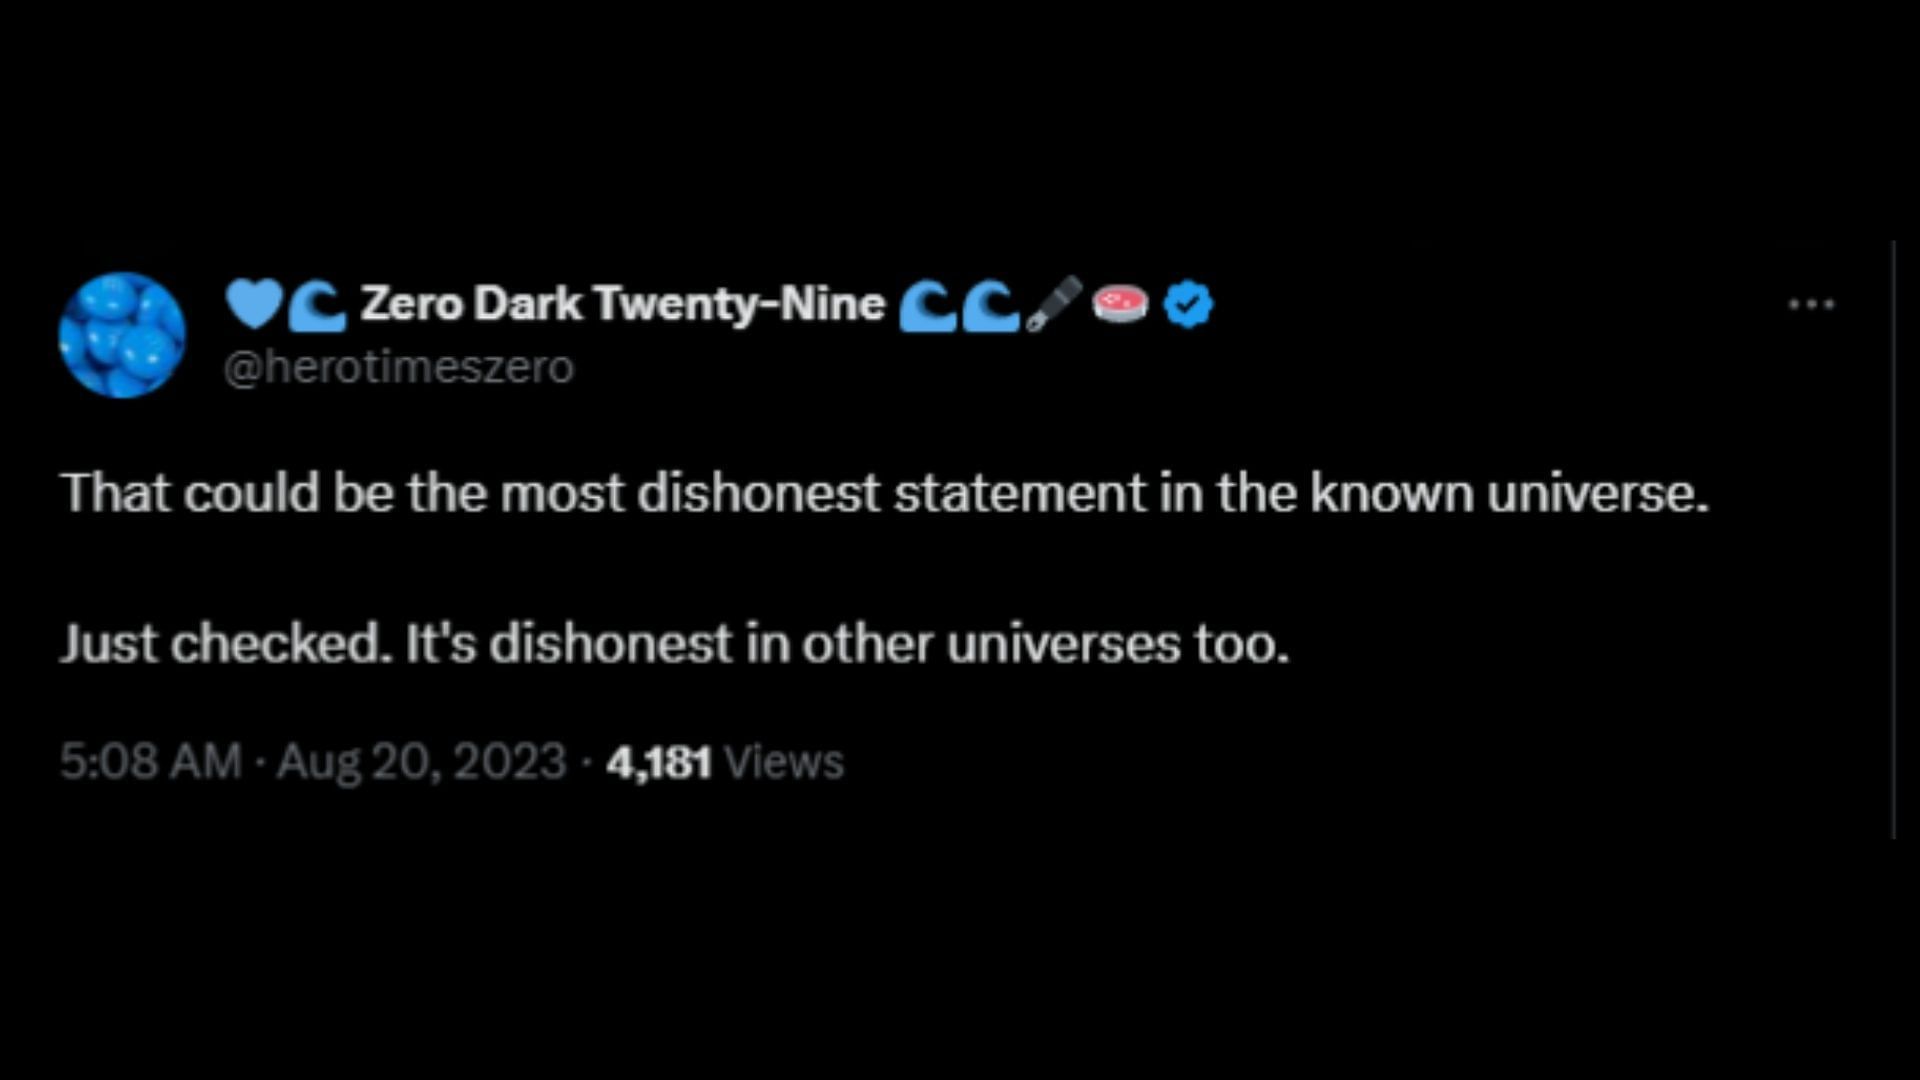 Screenshot of an X (formerly known as Twitter) user remarking on Eric&#039;s claims about the Trump family in the viral video clip. (Photo via @RonFilipkowski/X)